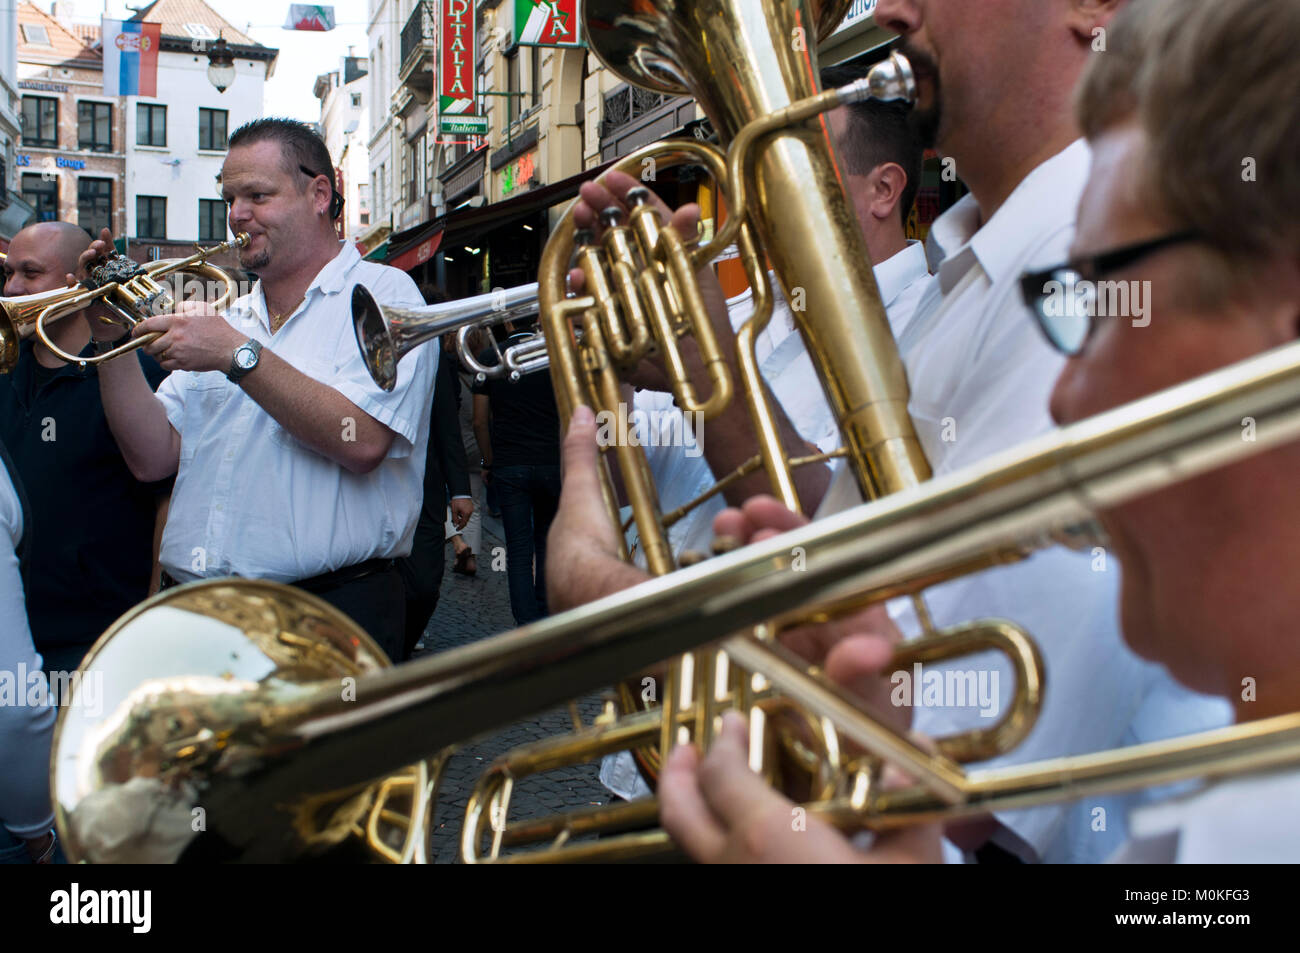 Musicians in the center of the city during the during the festival parade through Brussels, Belguim. Stock Photo